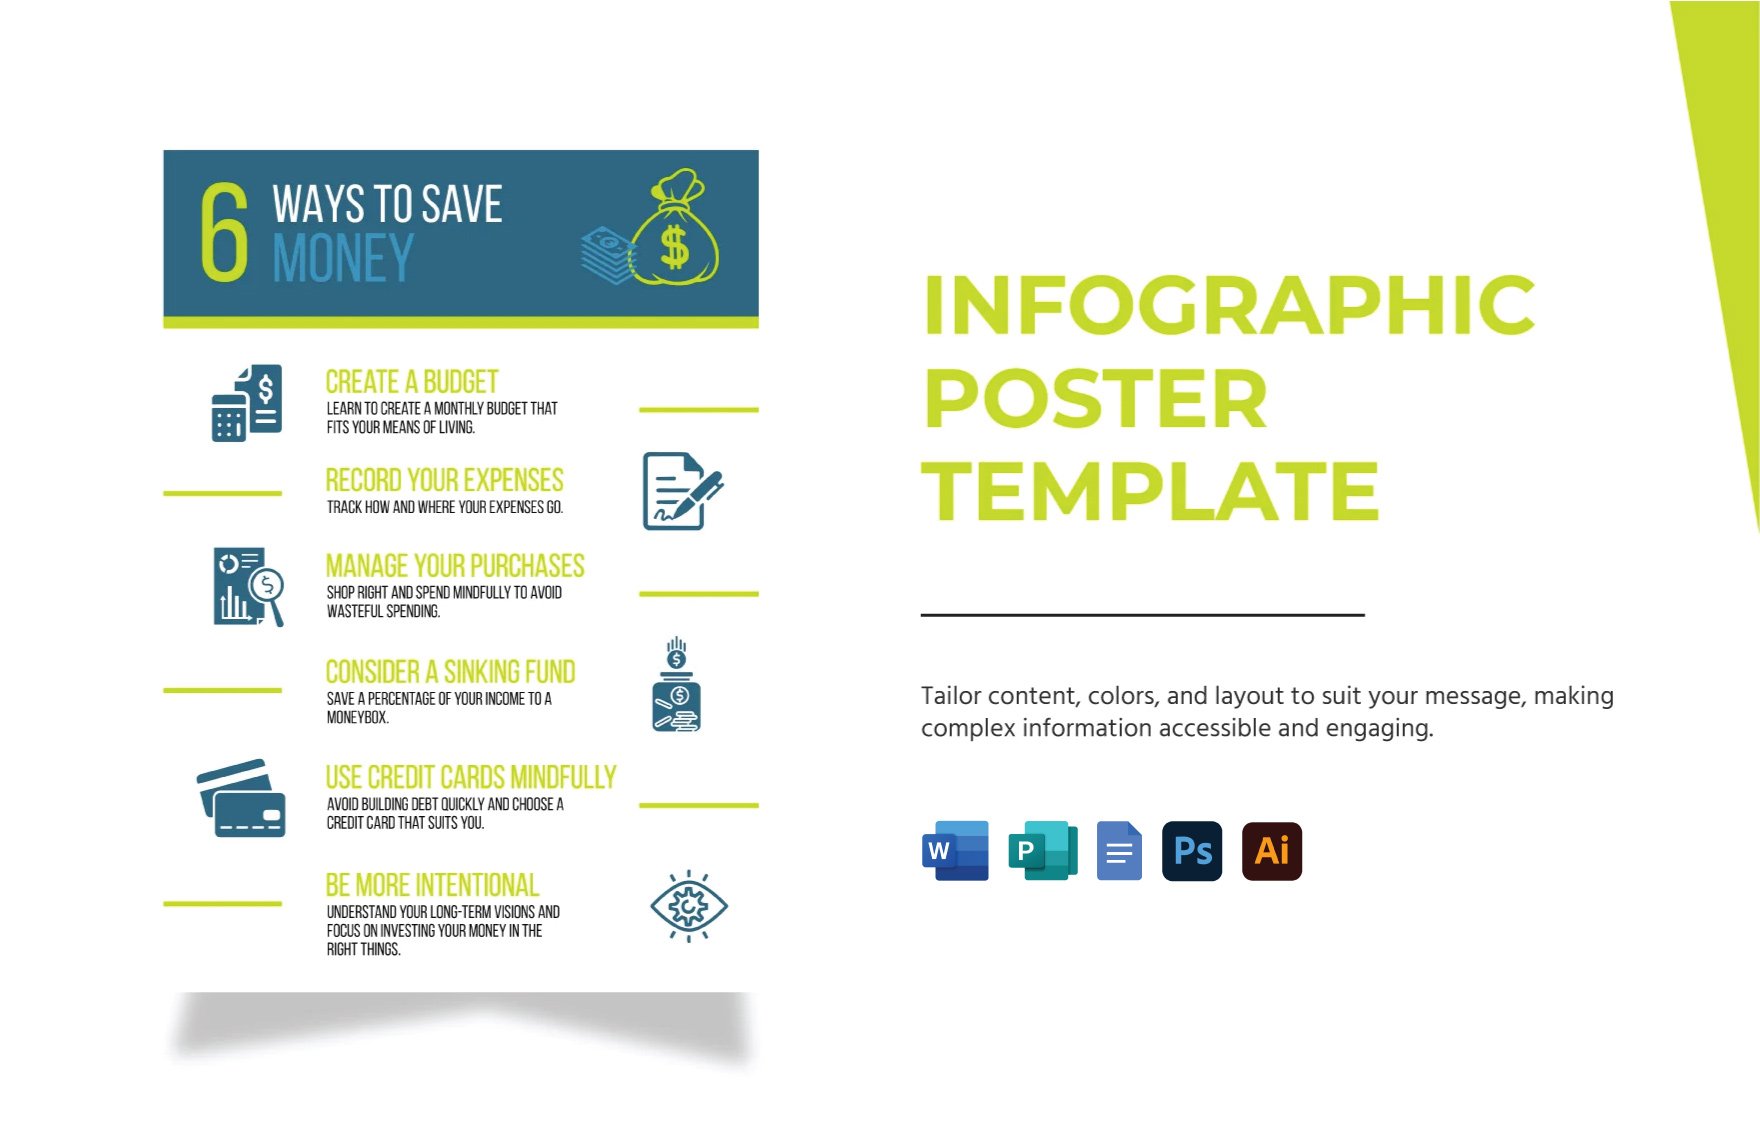 Infographic Poster